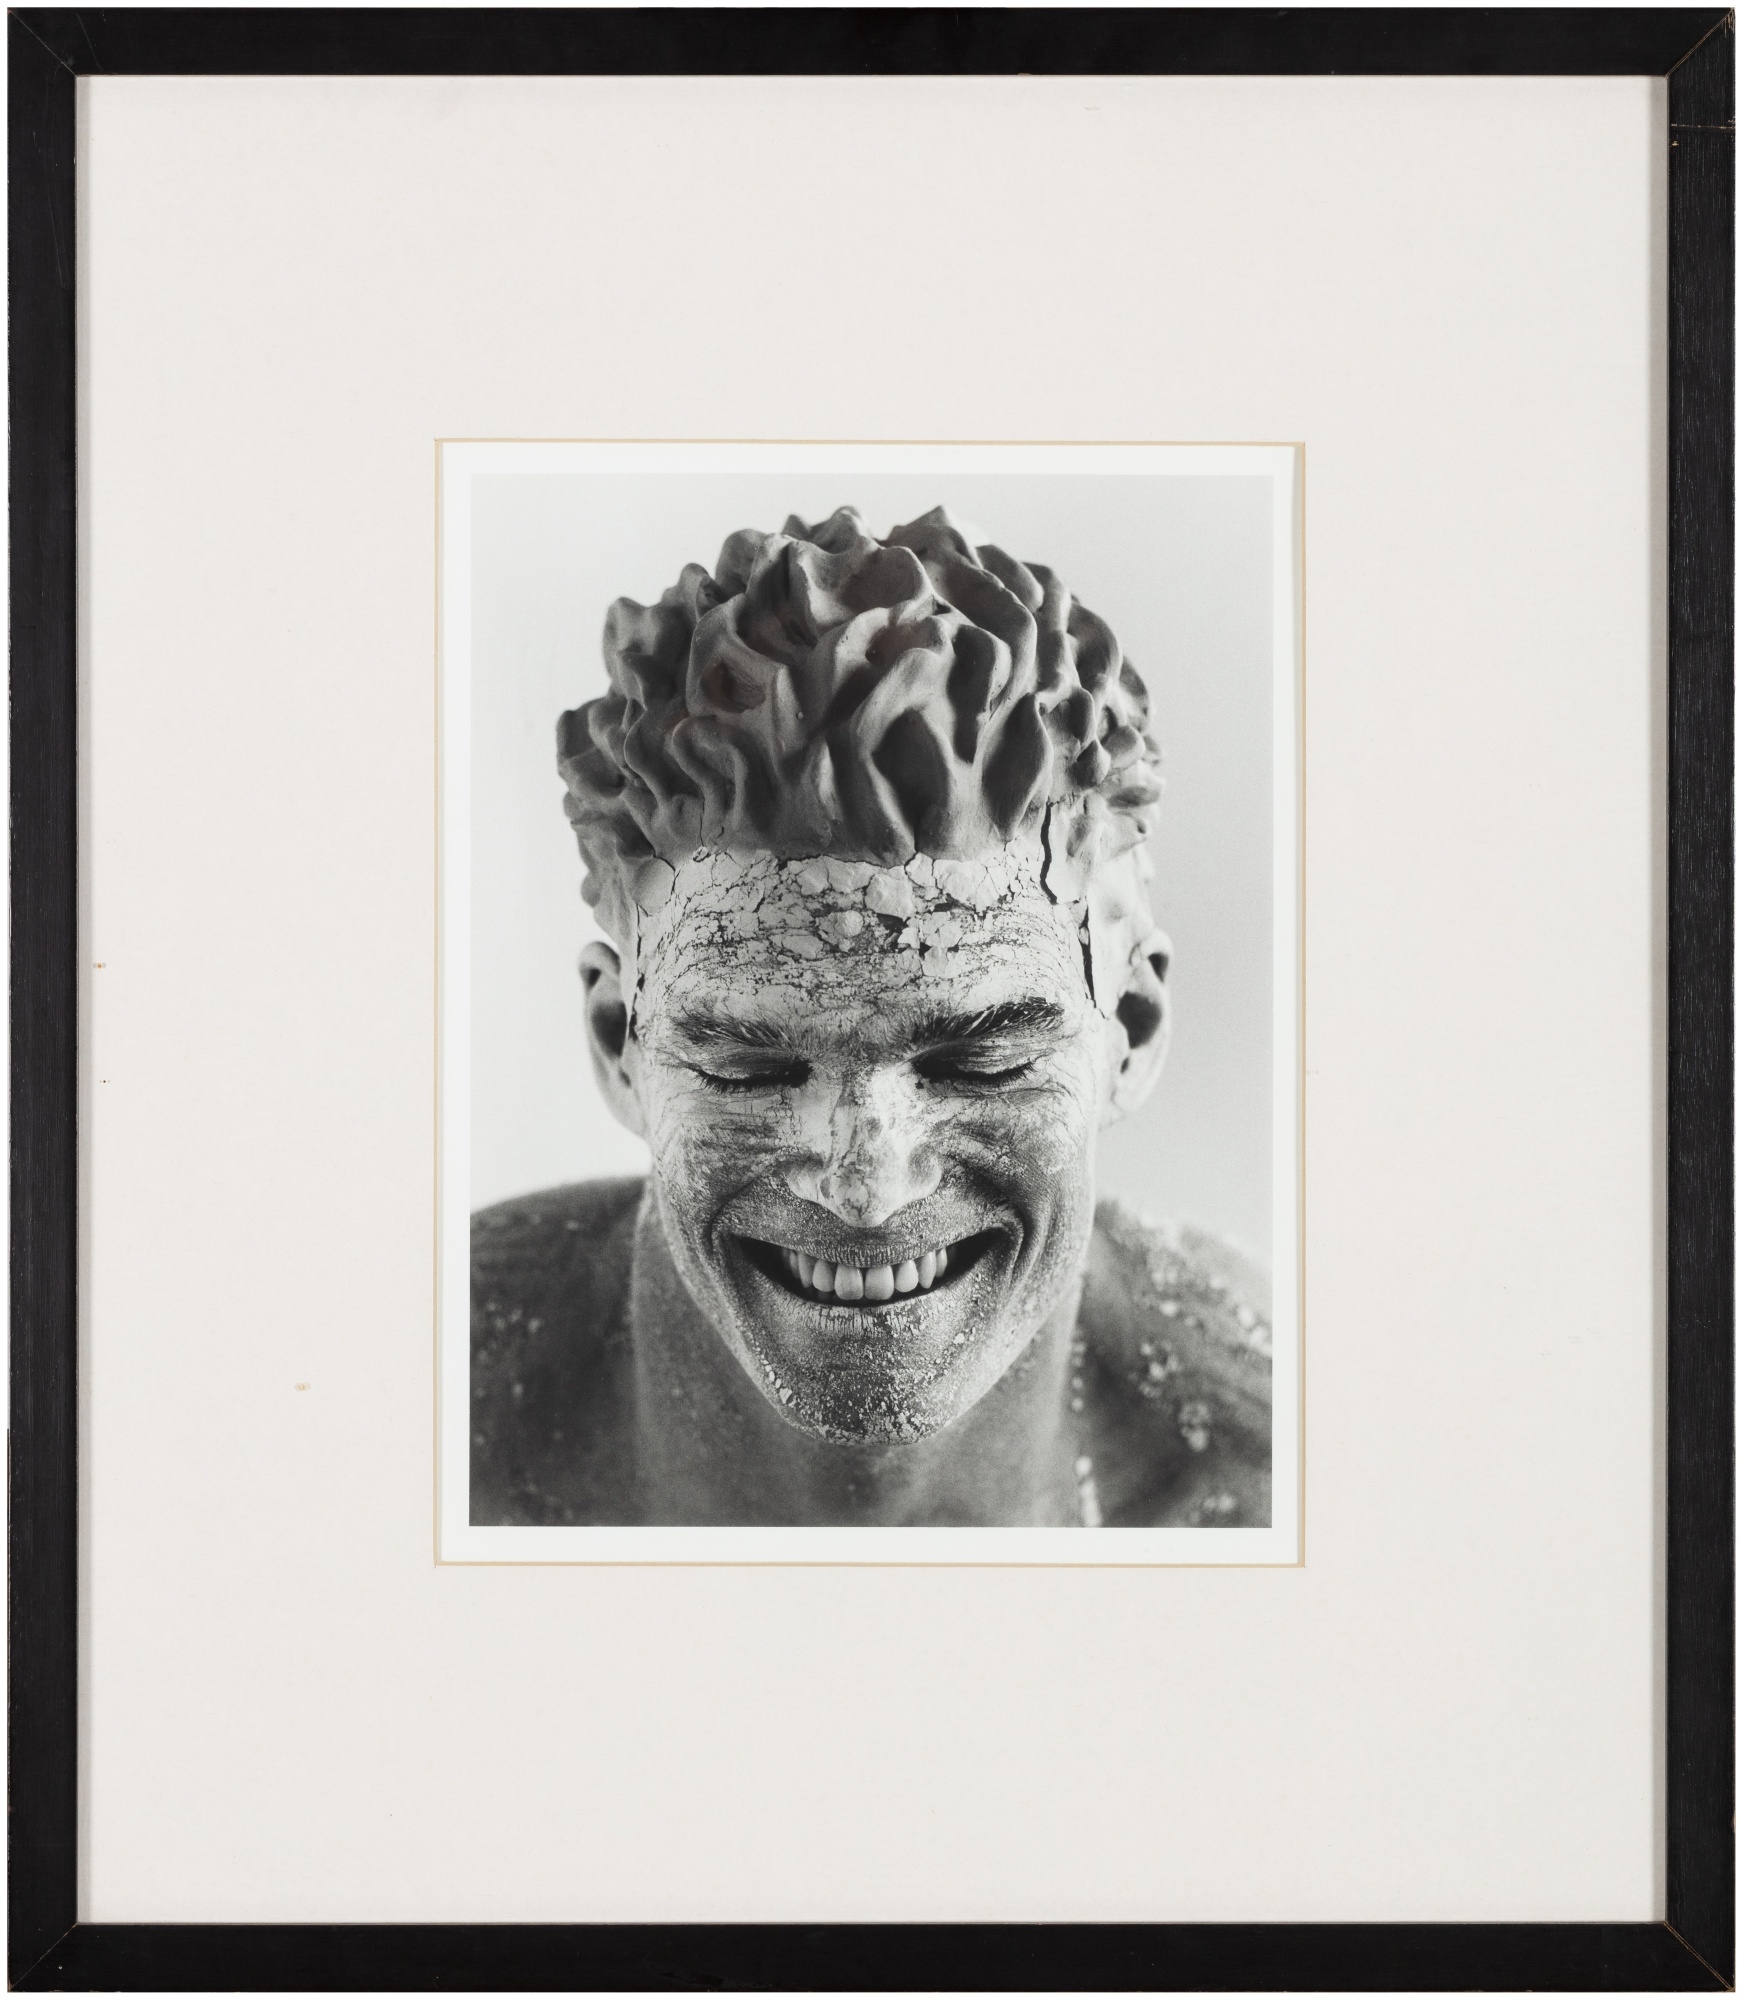 Artwork by Herb Ritts, 'Clay Face, Hollywood', Made of gelatin silver print